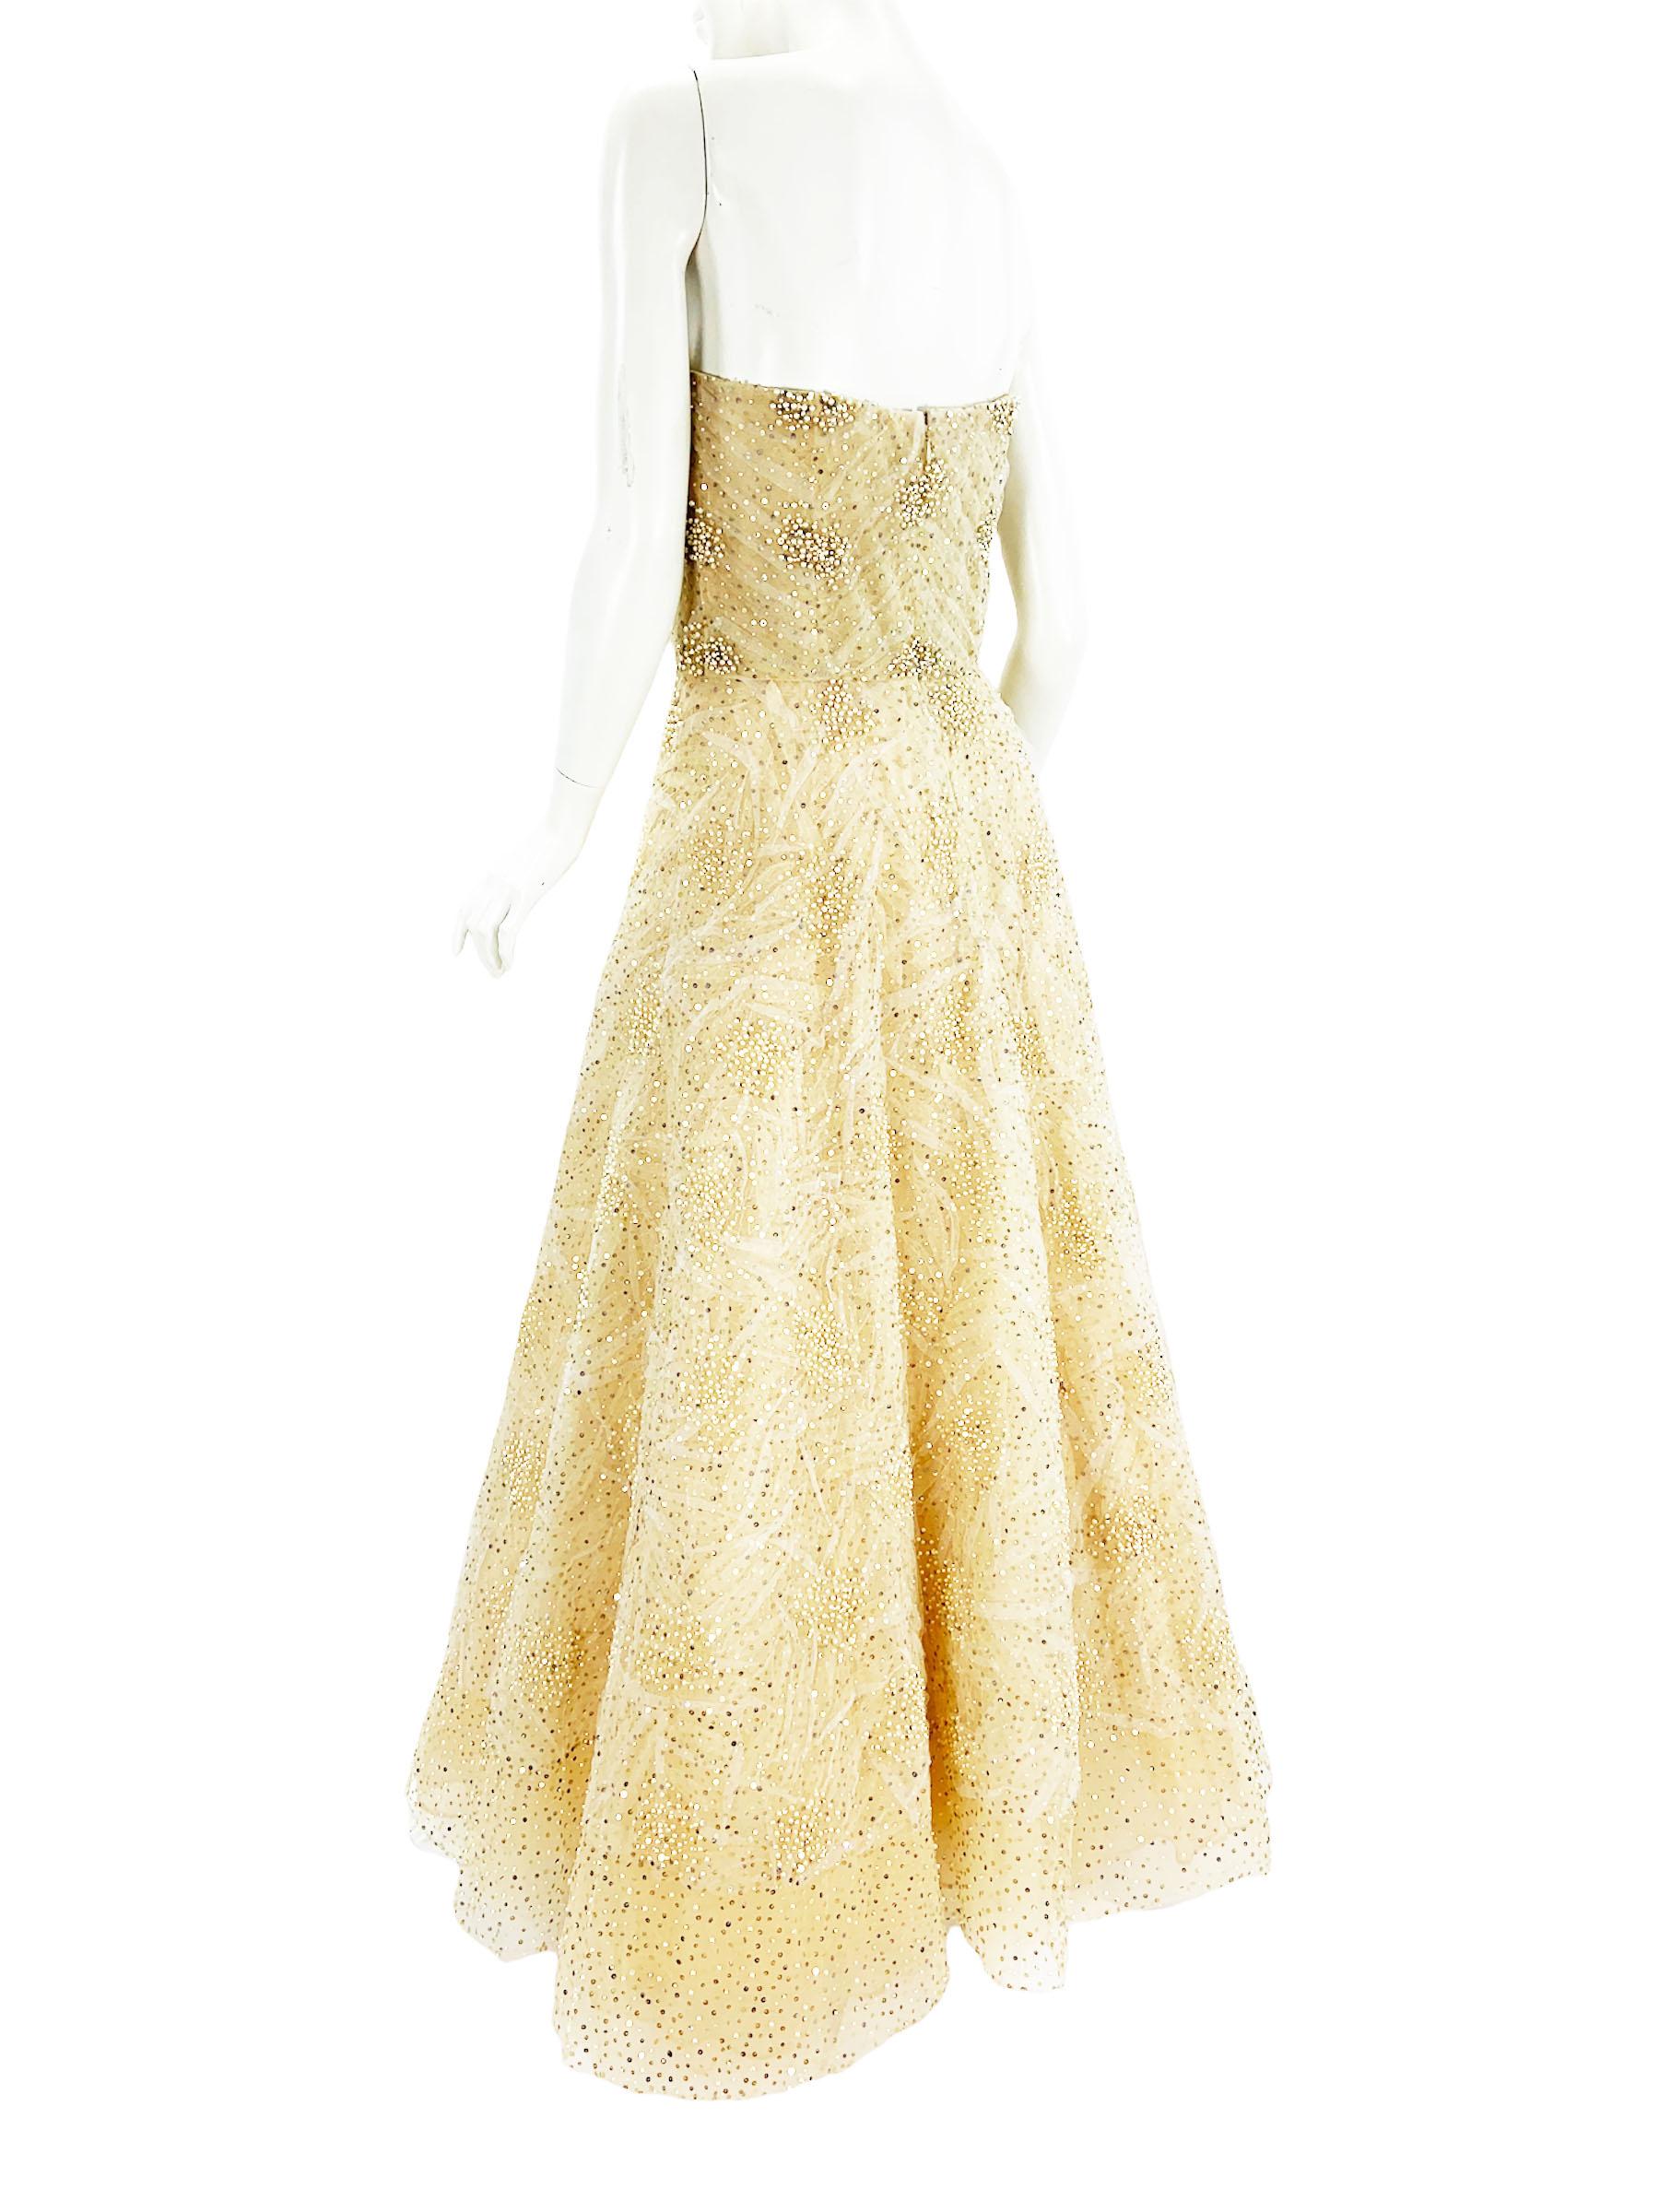 Beige NWT Oscar de la Renta 2008 Collection Champagne Fully Beaded Dress Gown US 8 For Sale